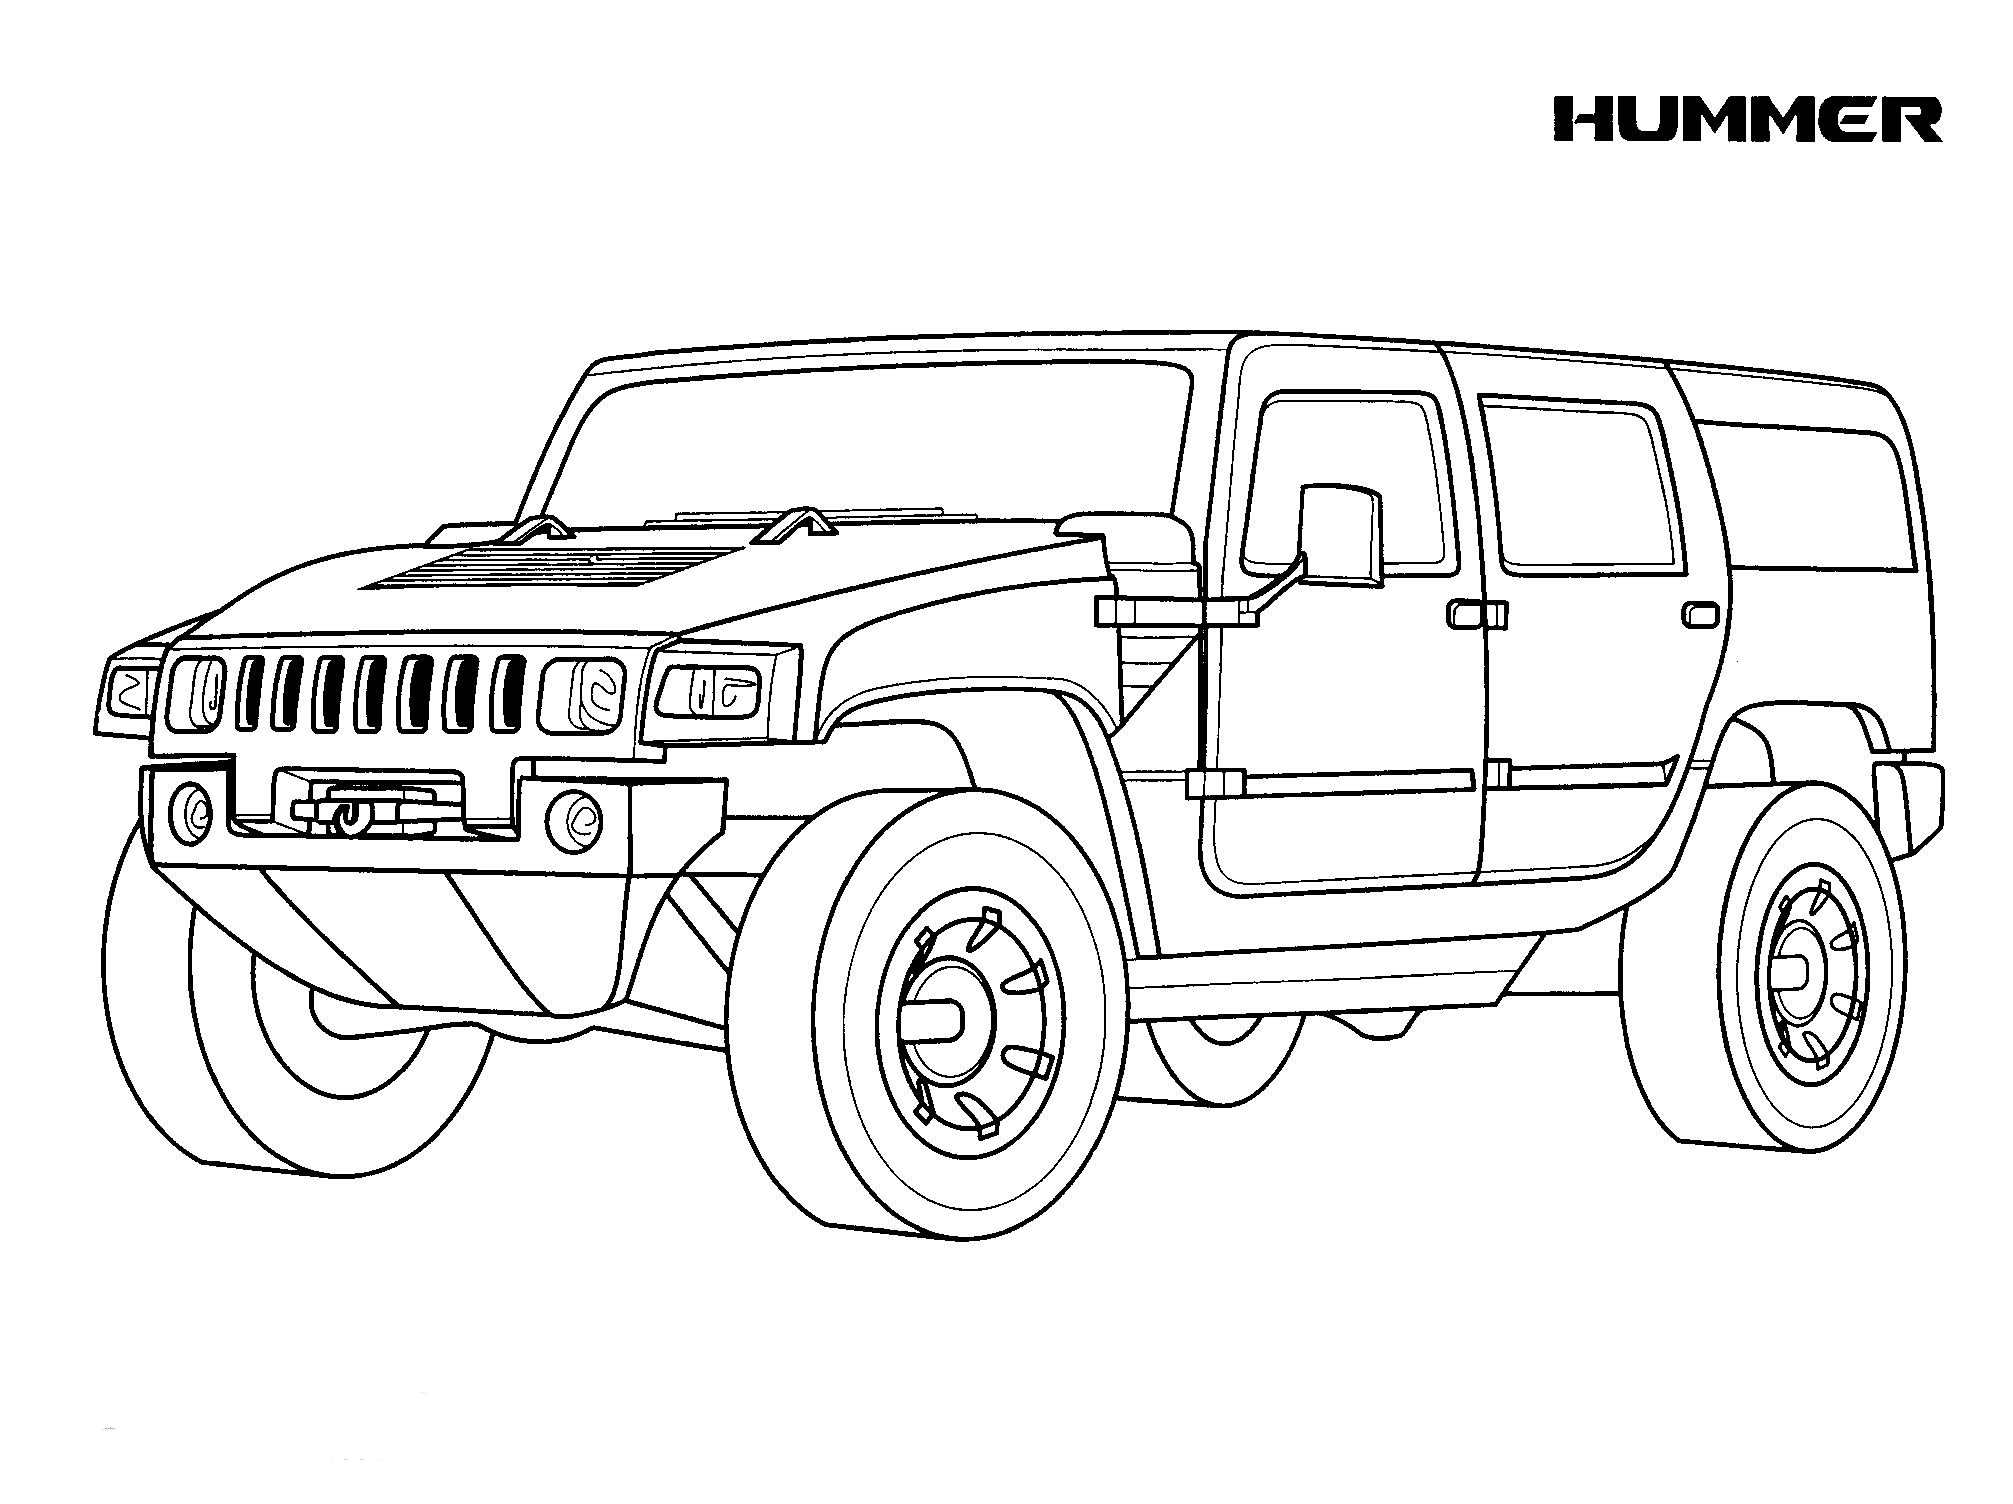 Hummer Car Coloring Pages